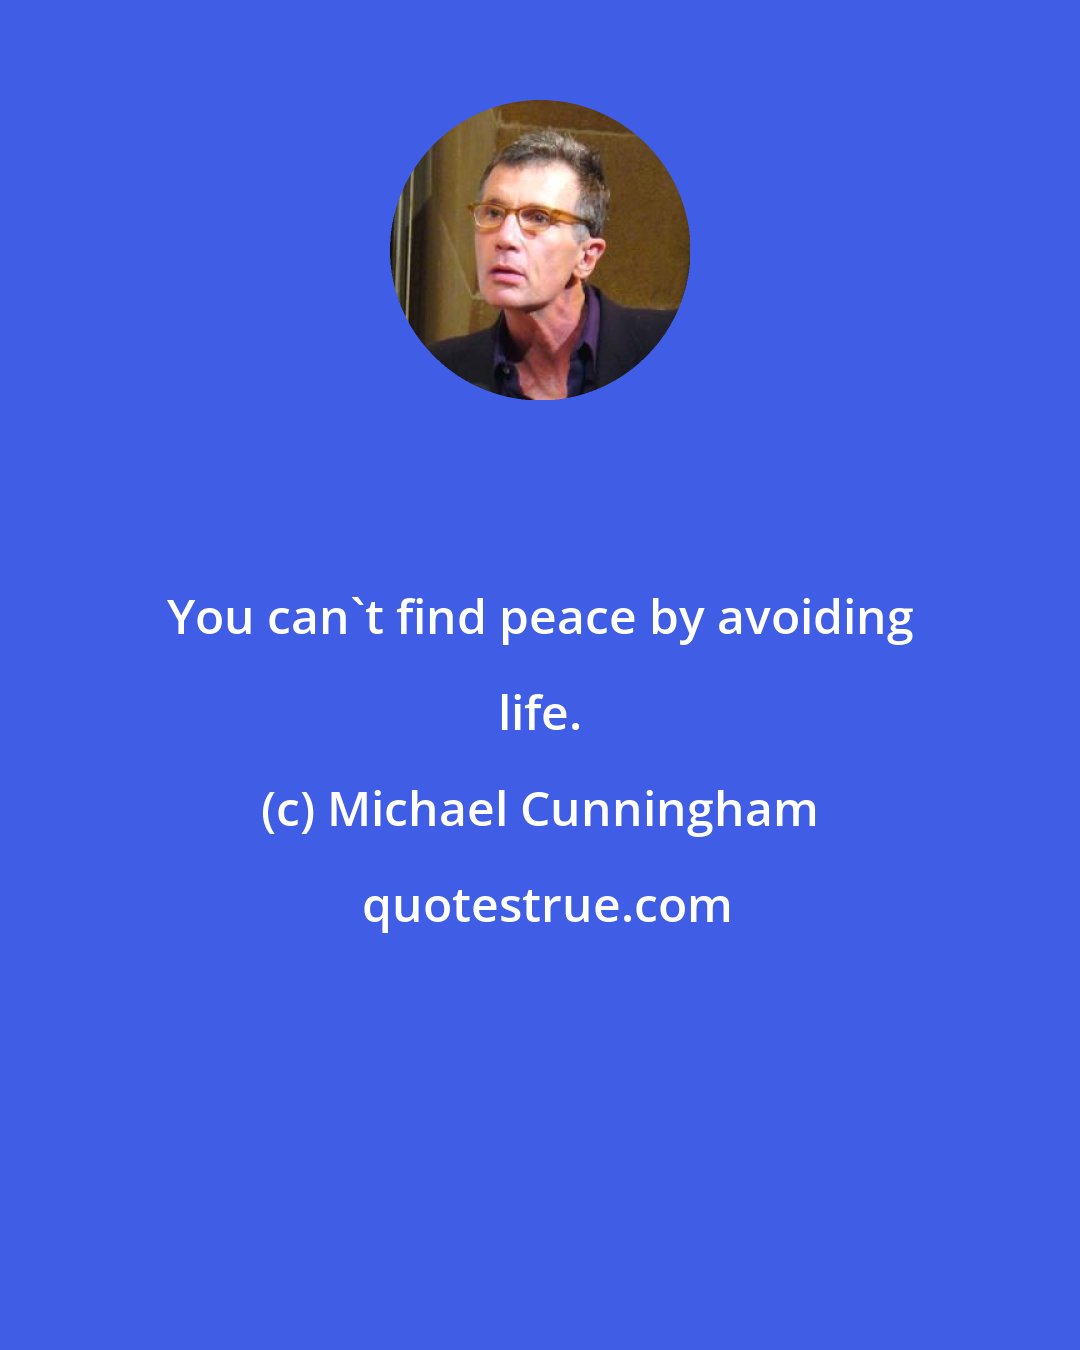 Michael Cunningham: You can't find peace by avoiding life.